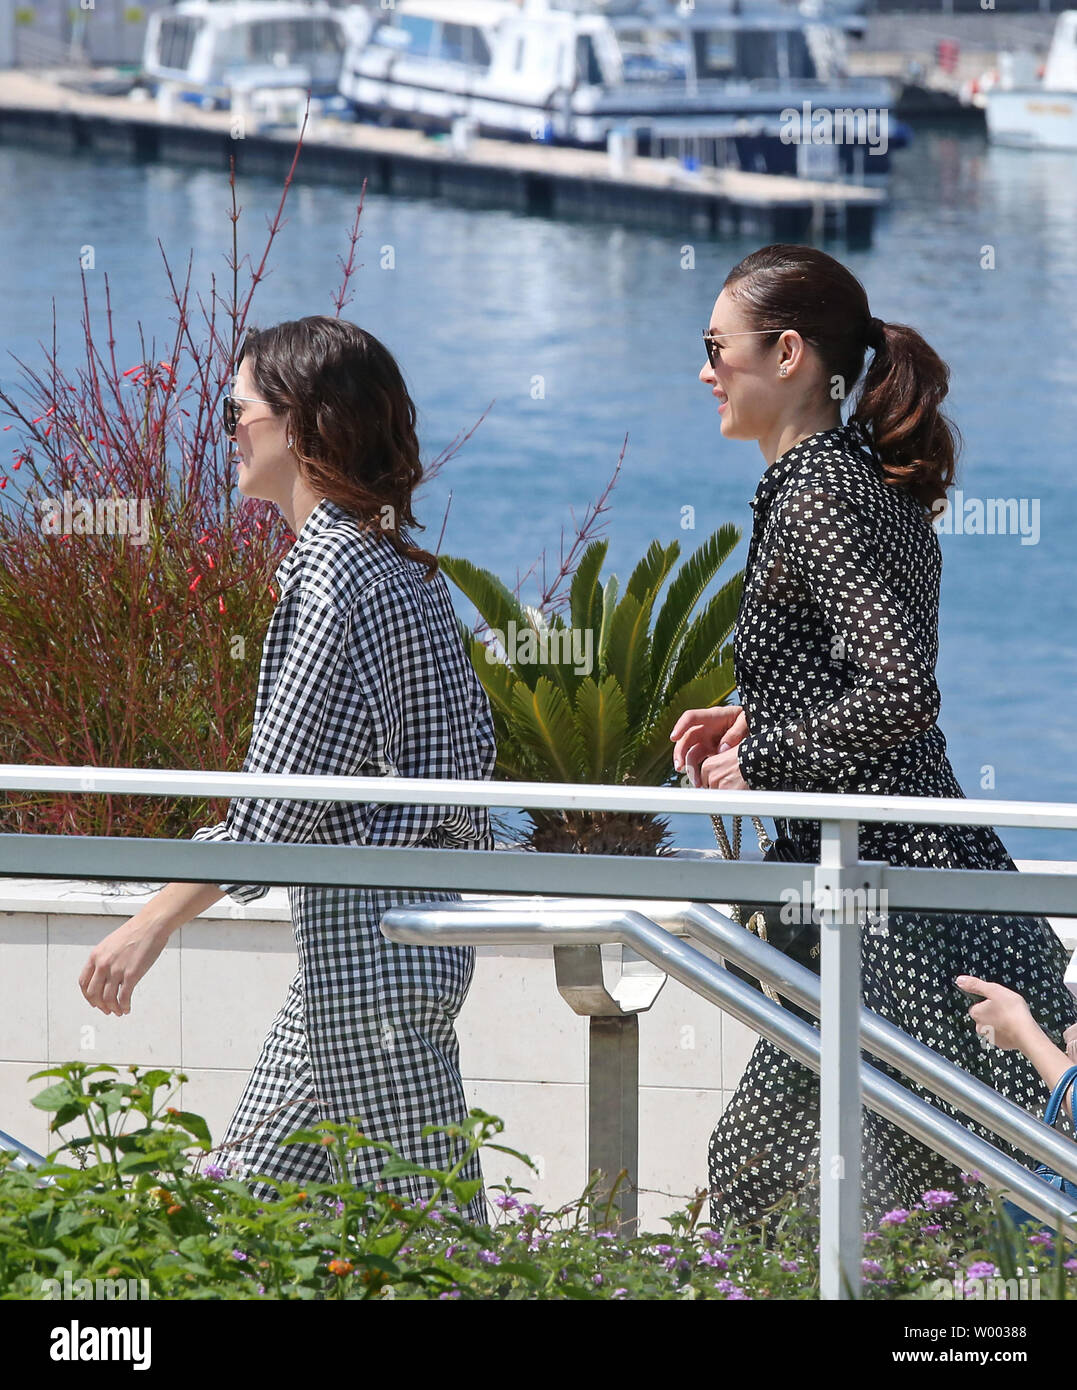 Joana Ribeiro (L) and Olga Kurylenko arrive at a photocall for the film 'The Man Who Killed Don Quixote' during the 71st annual Cannes International Film Festival in Cannes, France on May 19, 2018.  Photo by David Silpa/UPI Stock Photo